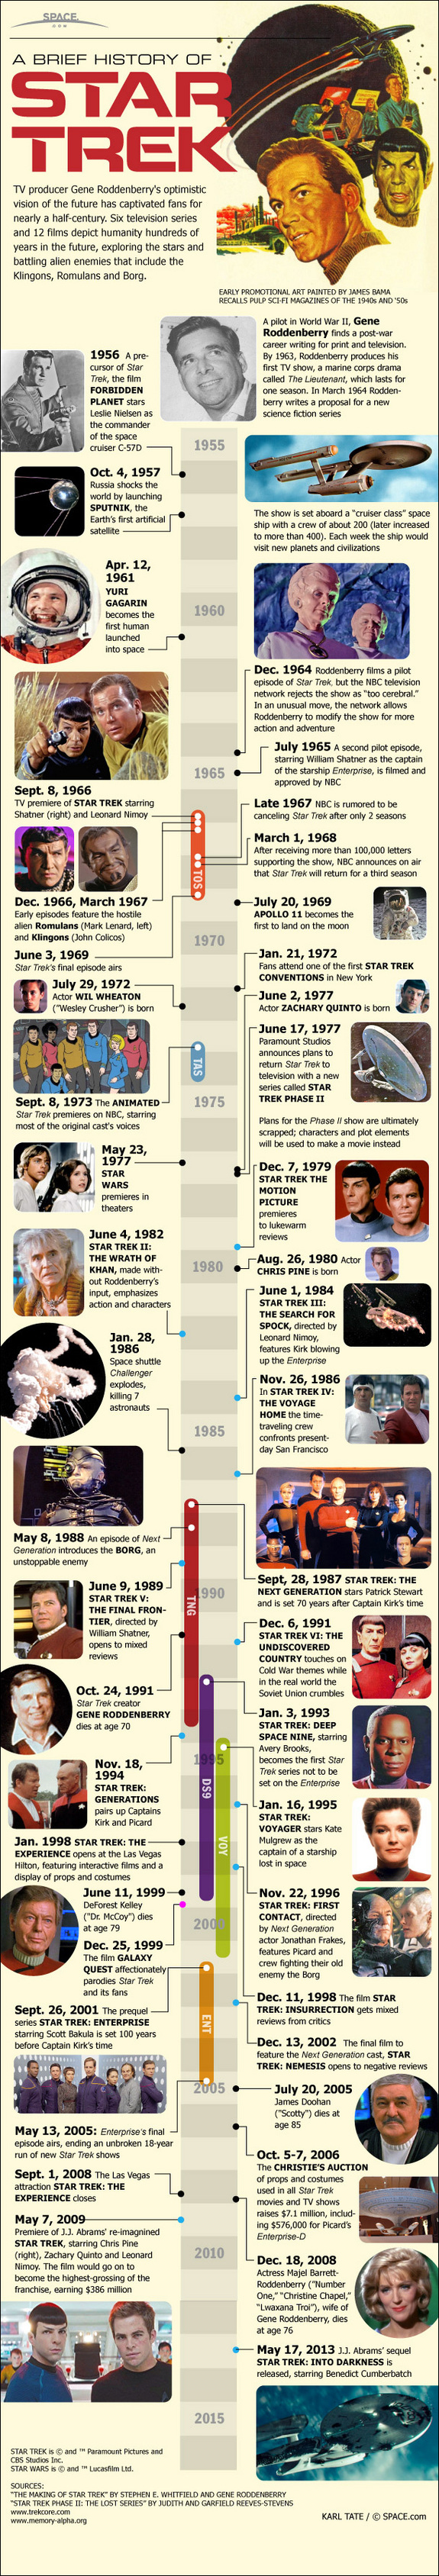 The entire history of Star Trek is in this SPACE.com timeline infographic.